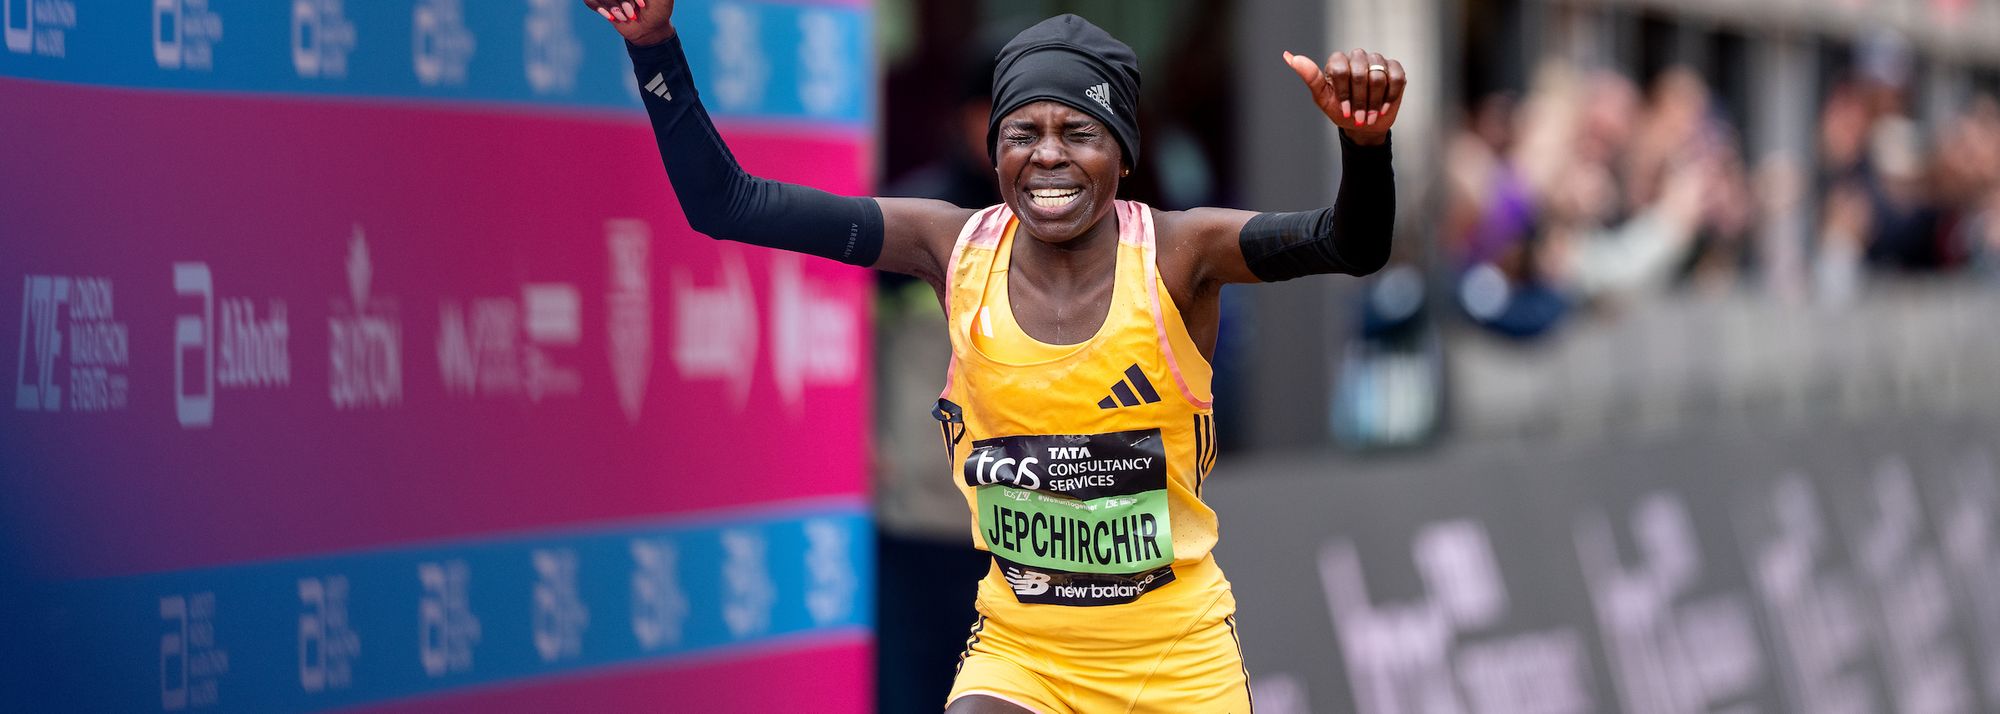 Olympic champion Peres Jepchirchir smashed the women-only world record by 45 seconds